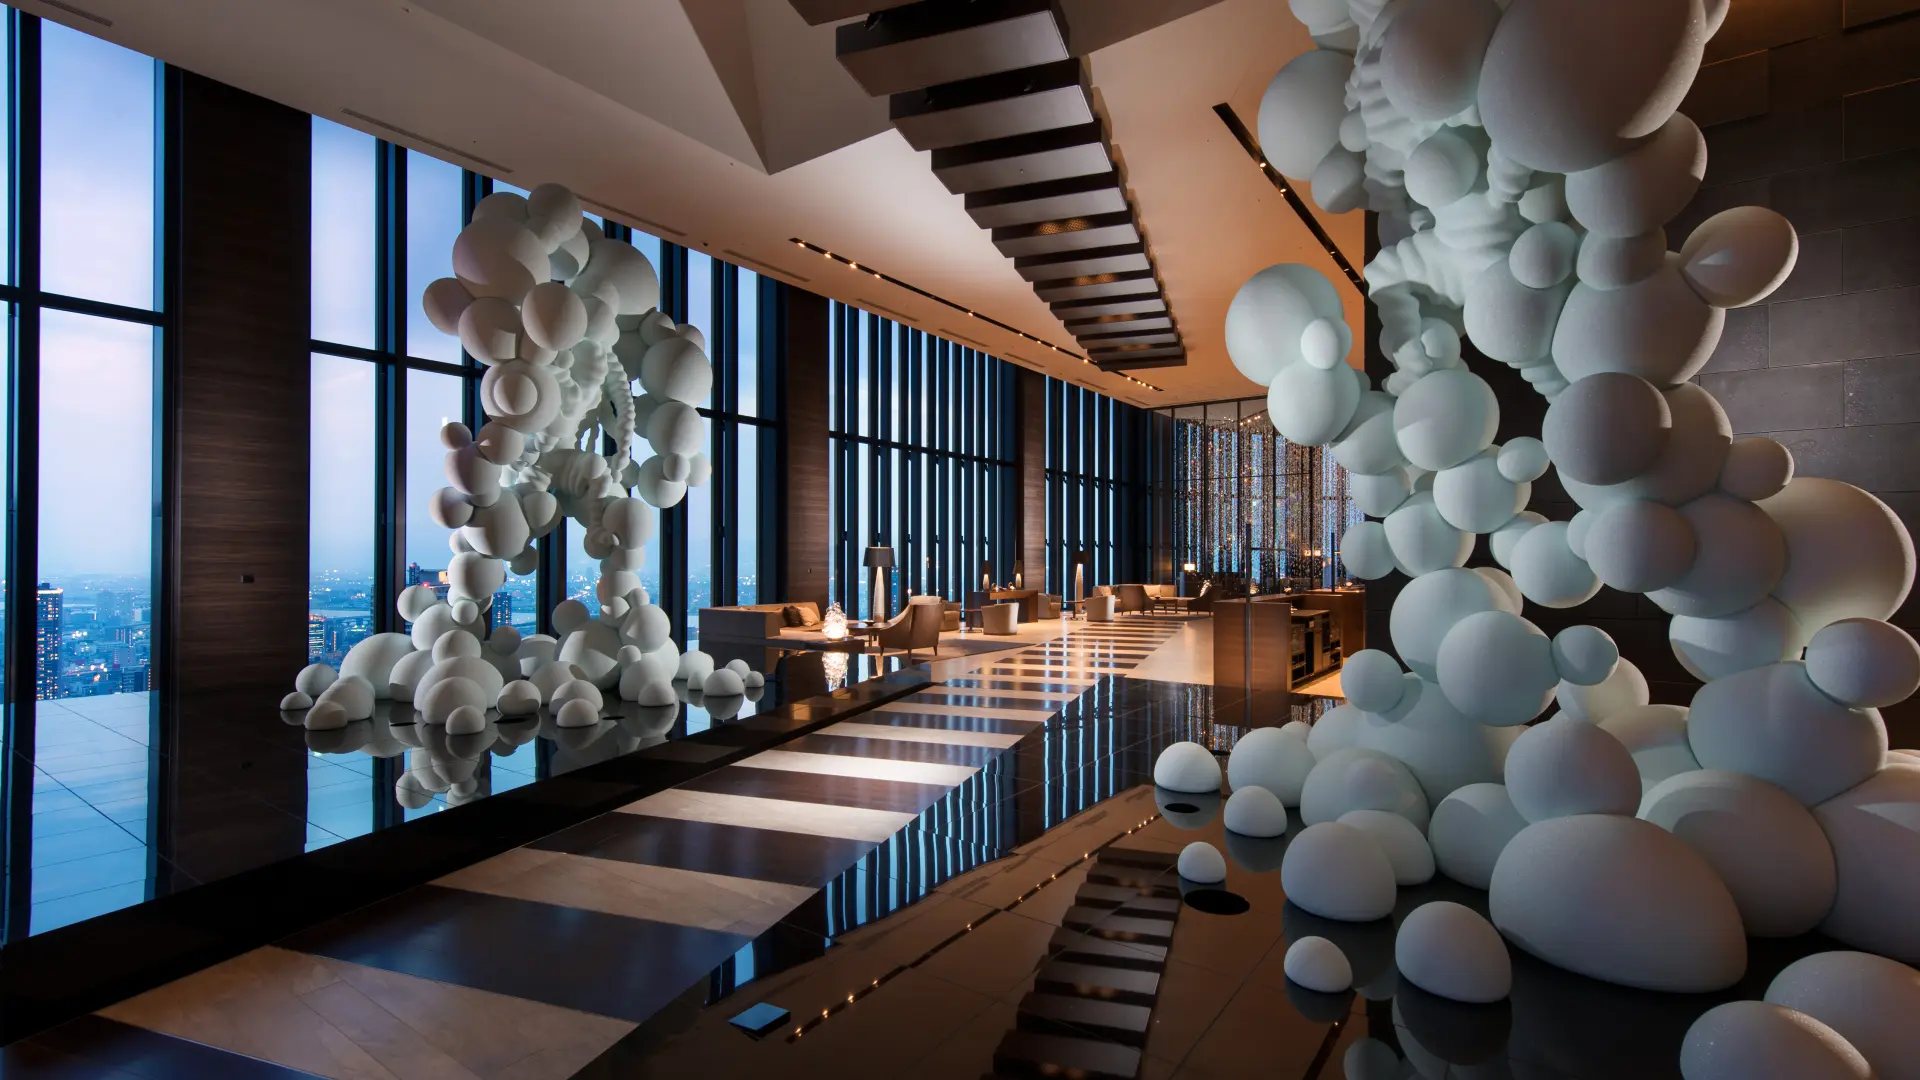 Inside Conrad Osaka, dining area with windows and white sculptures.